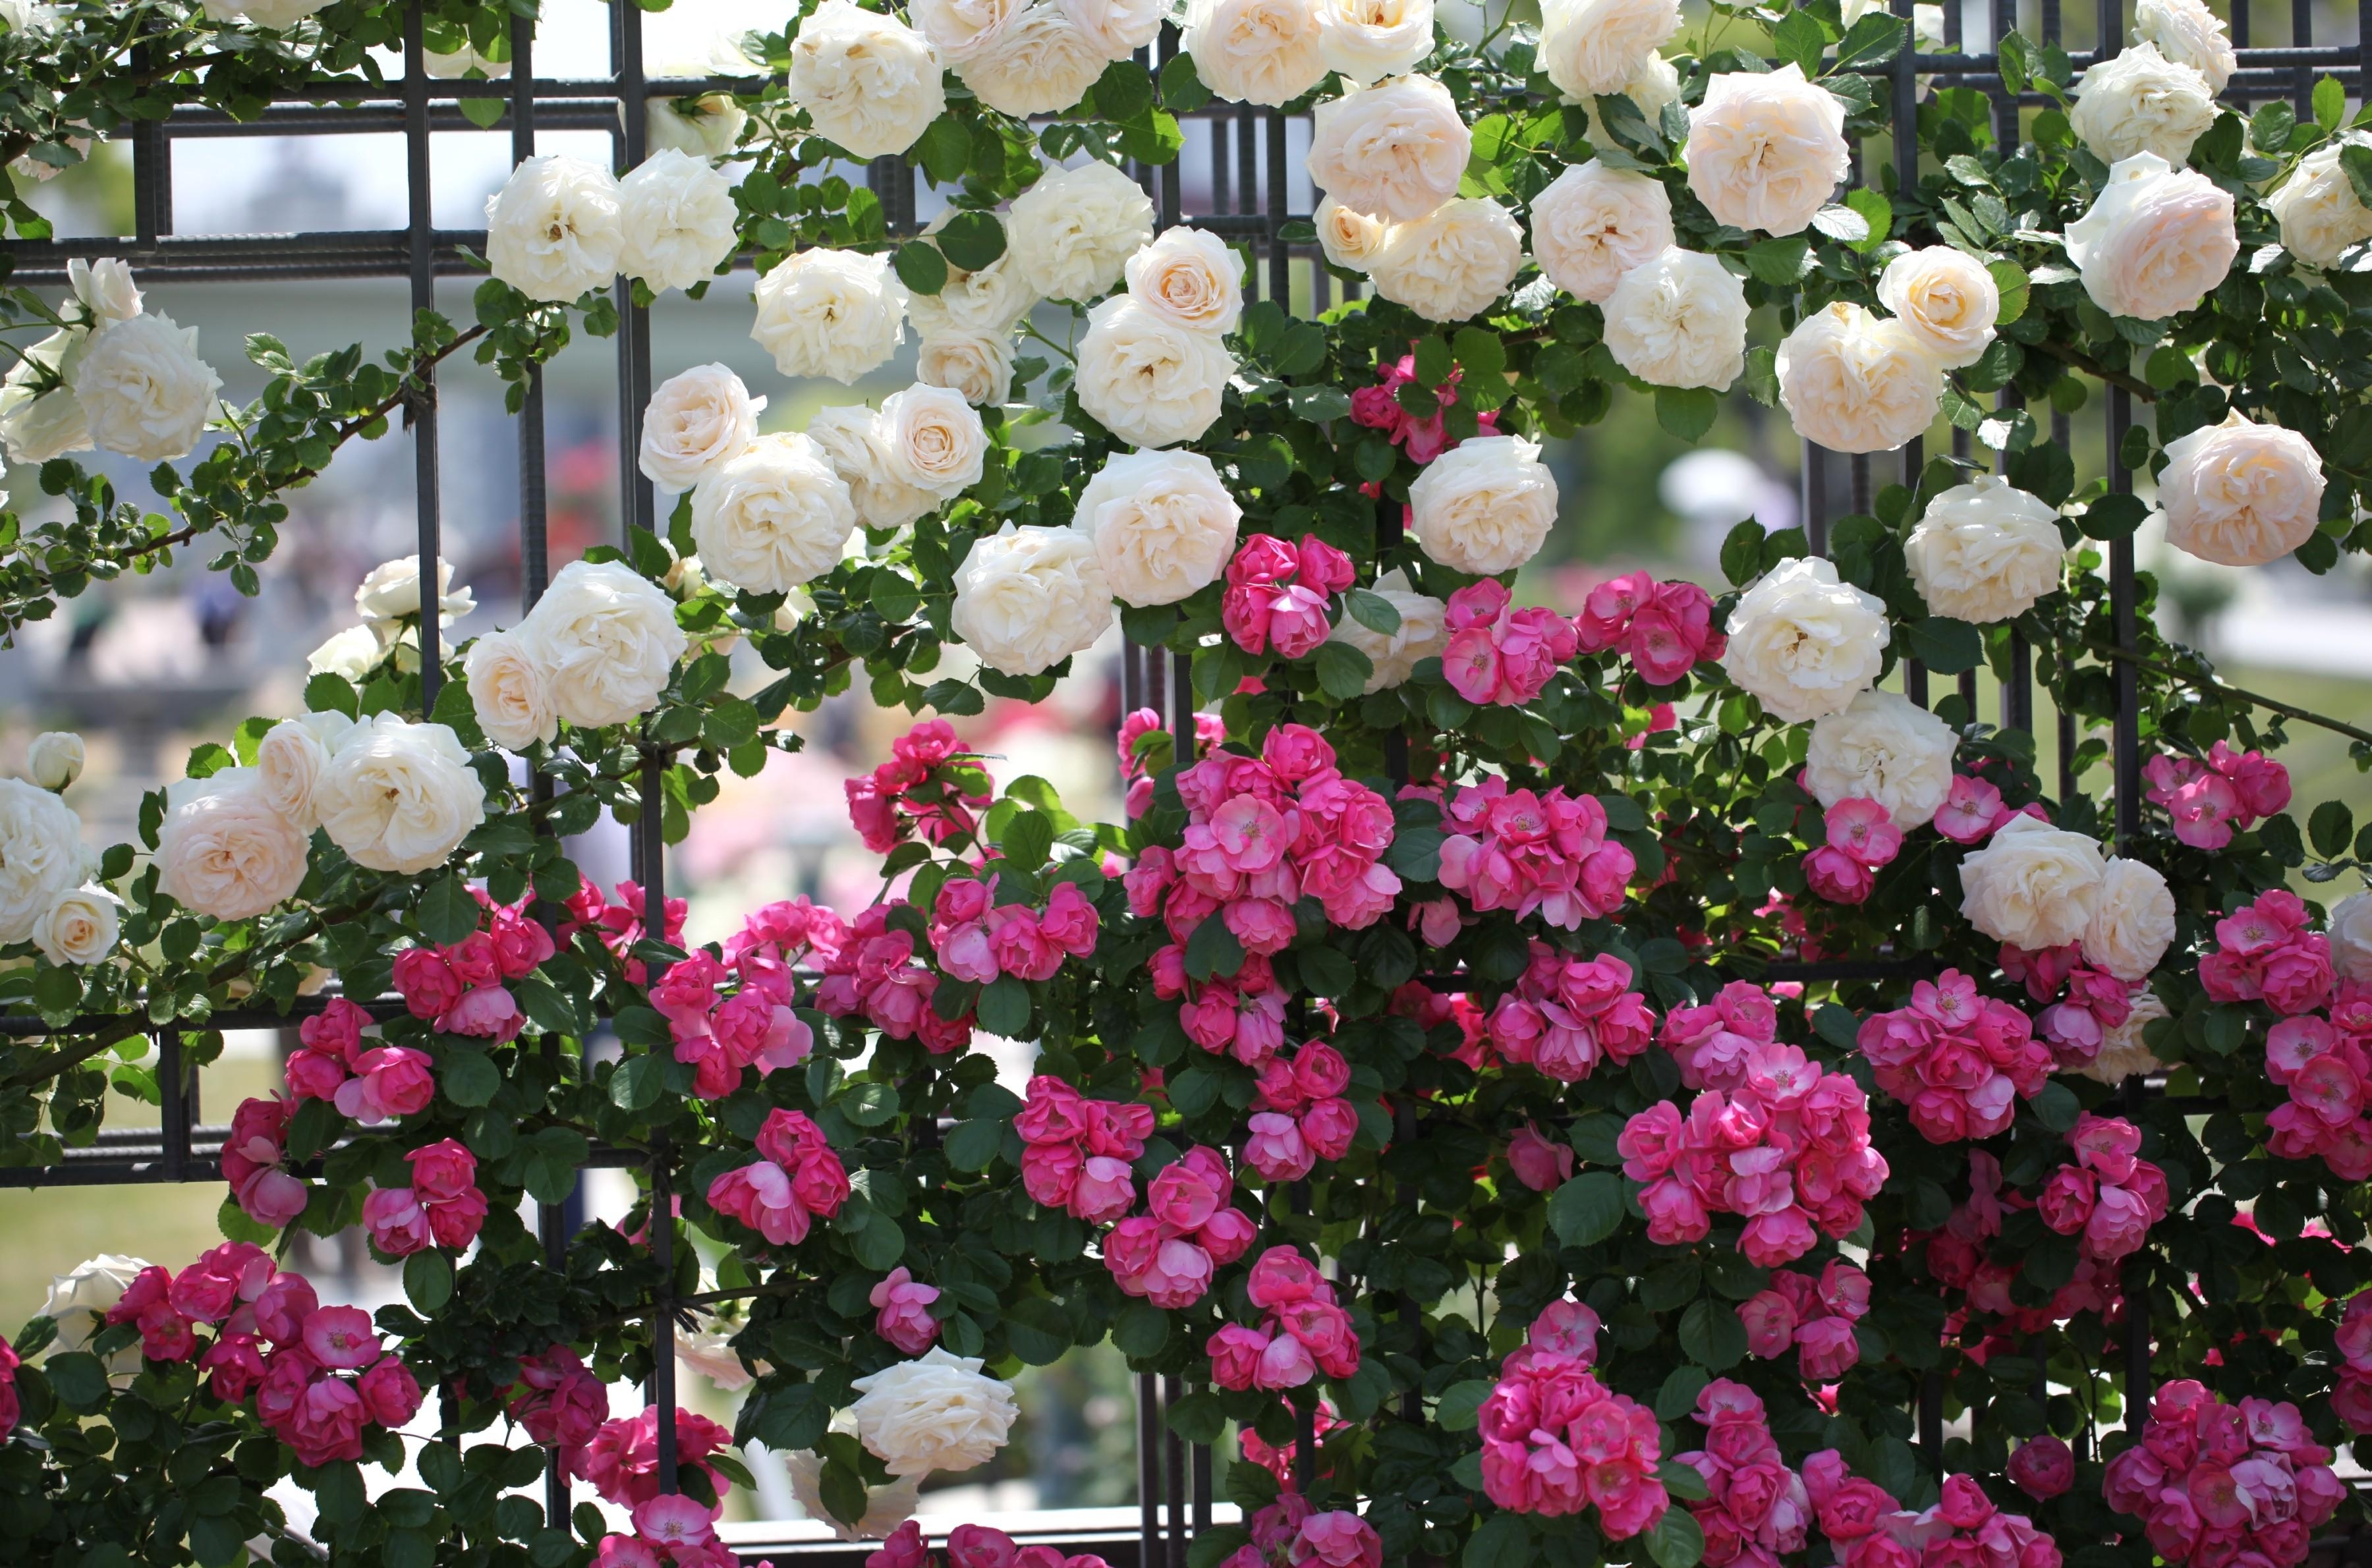 it's beautiful, roses, flowers, greens, fence, handsomely, different